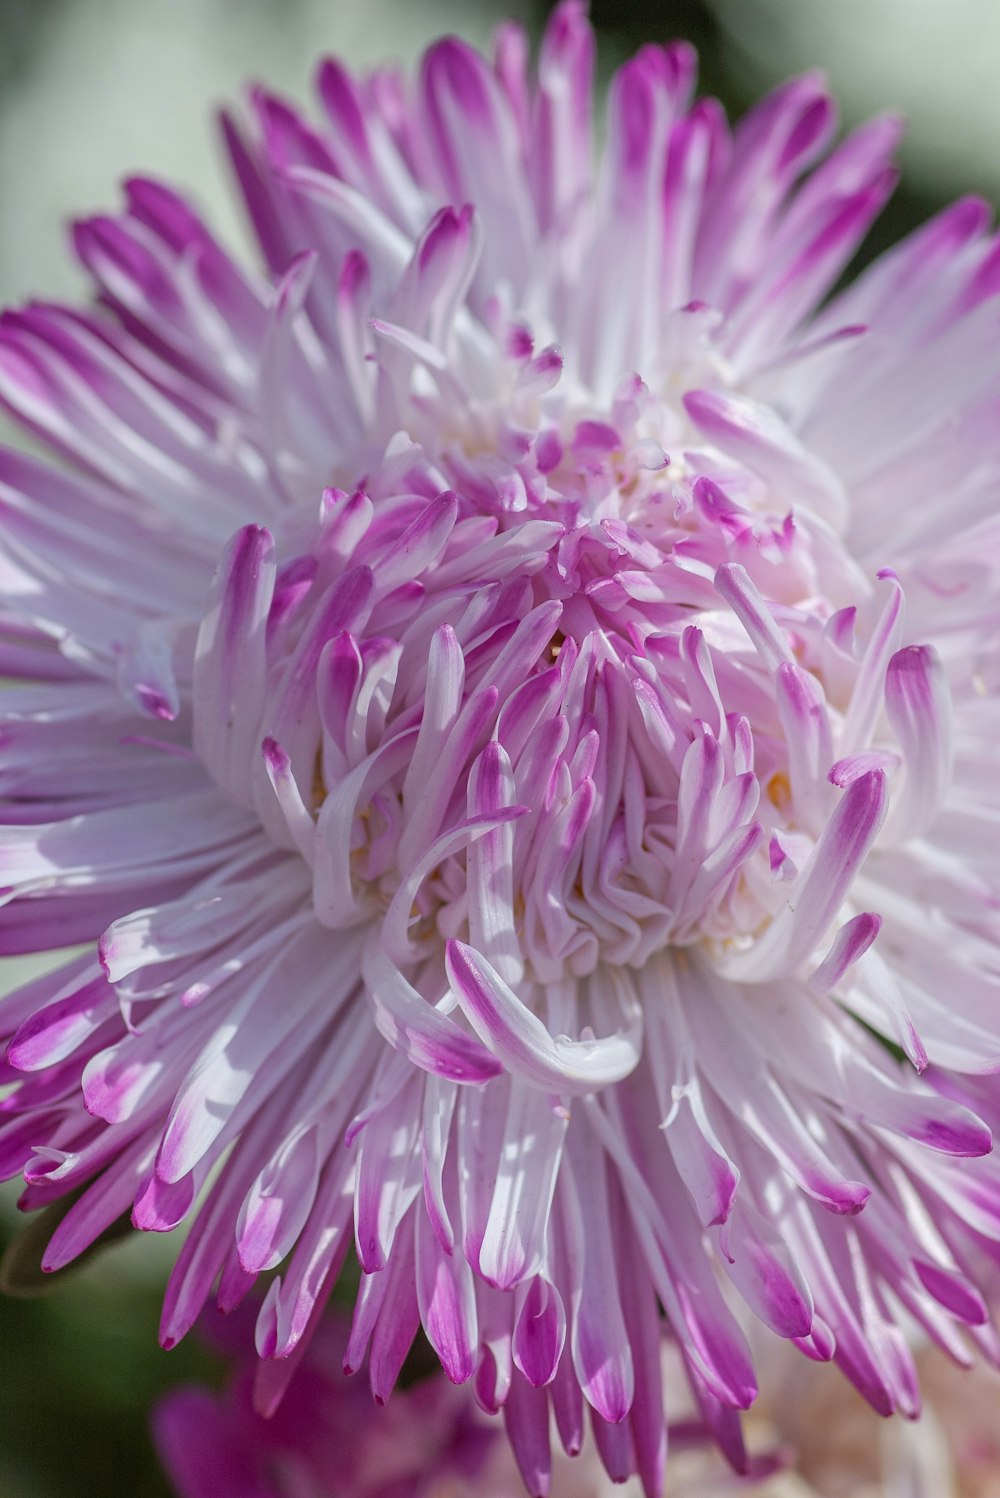 purple and white-petaled flower